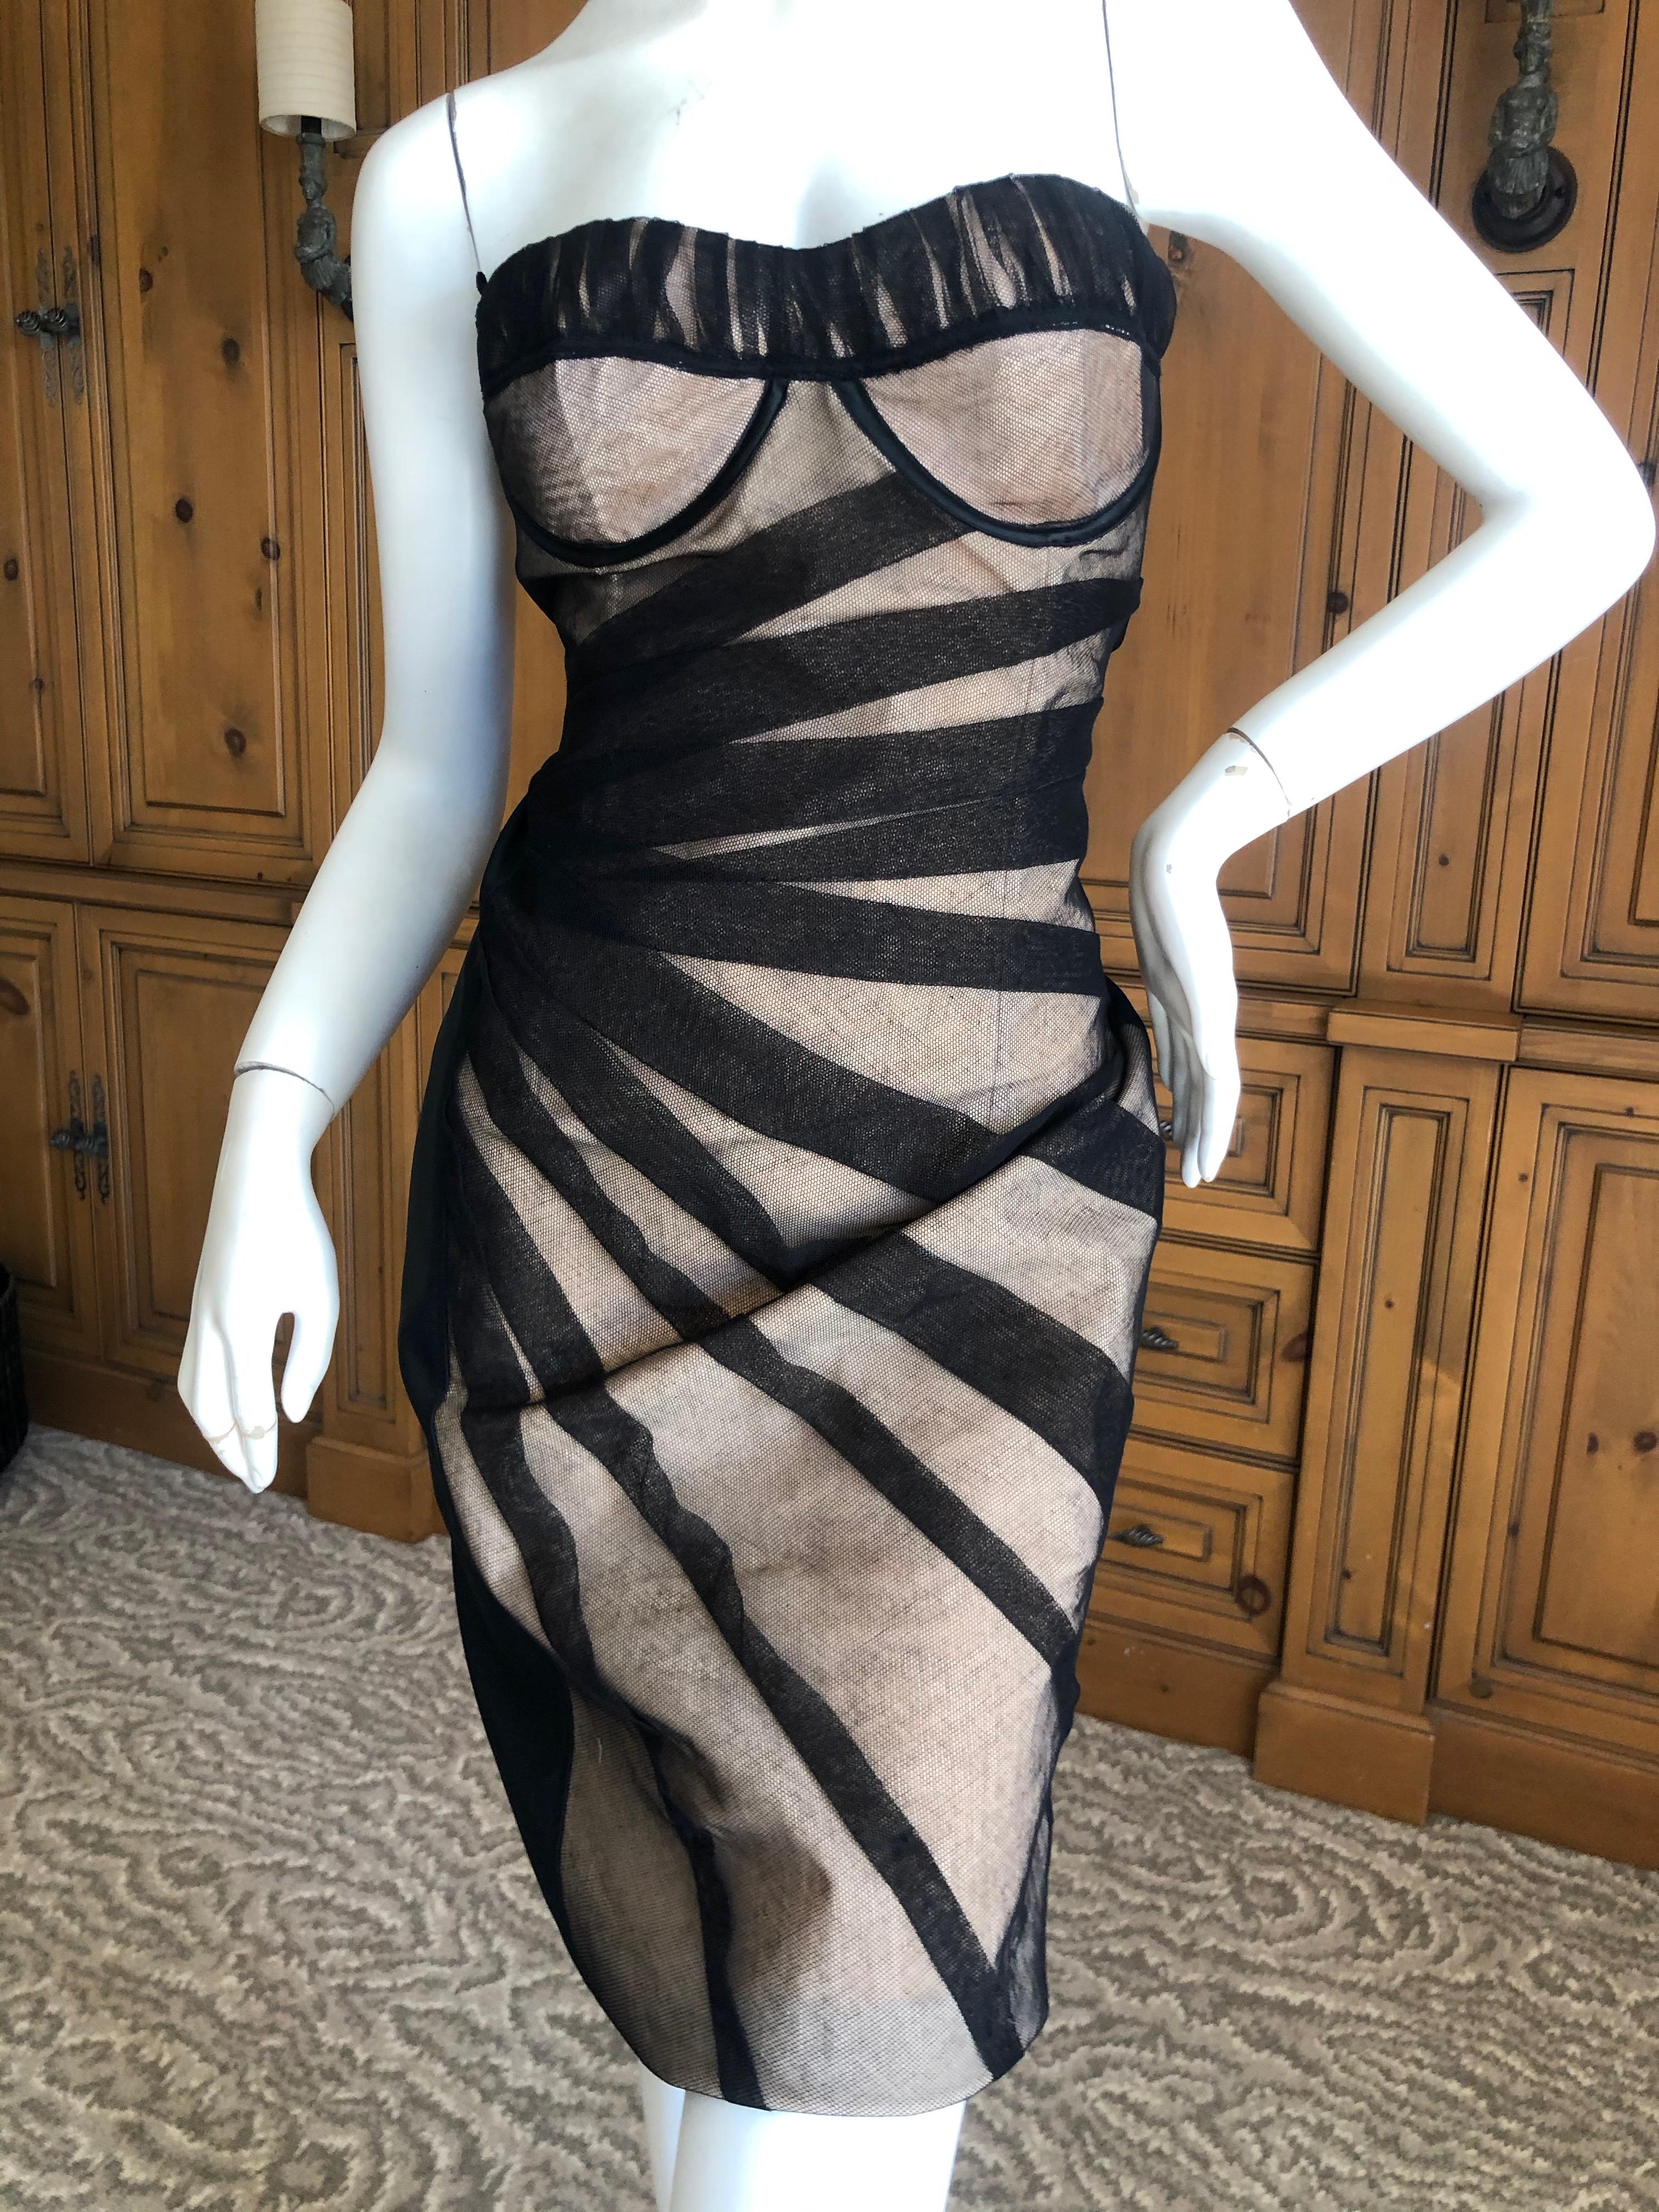 Dolce & Gabbana D&G Vintage Lace Accented Cocktail Dress.
There are detachable shoulder straps included, I do not show it with the straps.
 New with Tags
Size 46
Bust 34